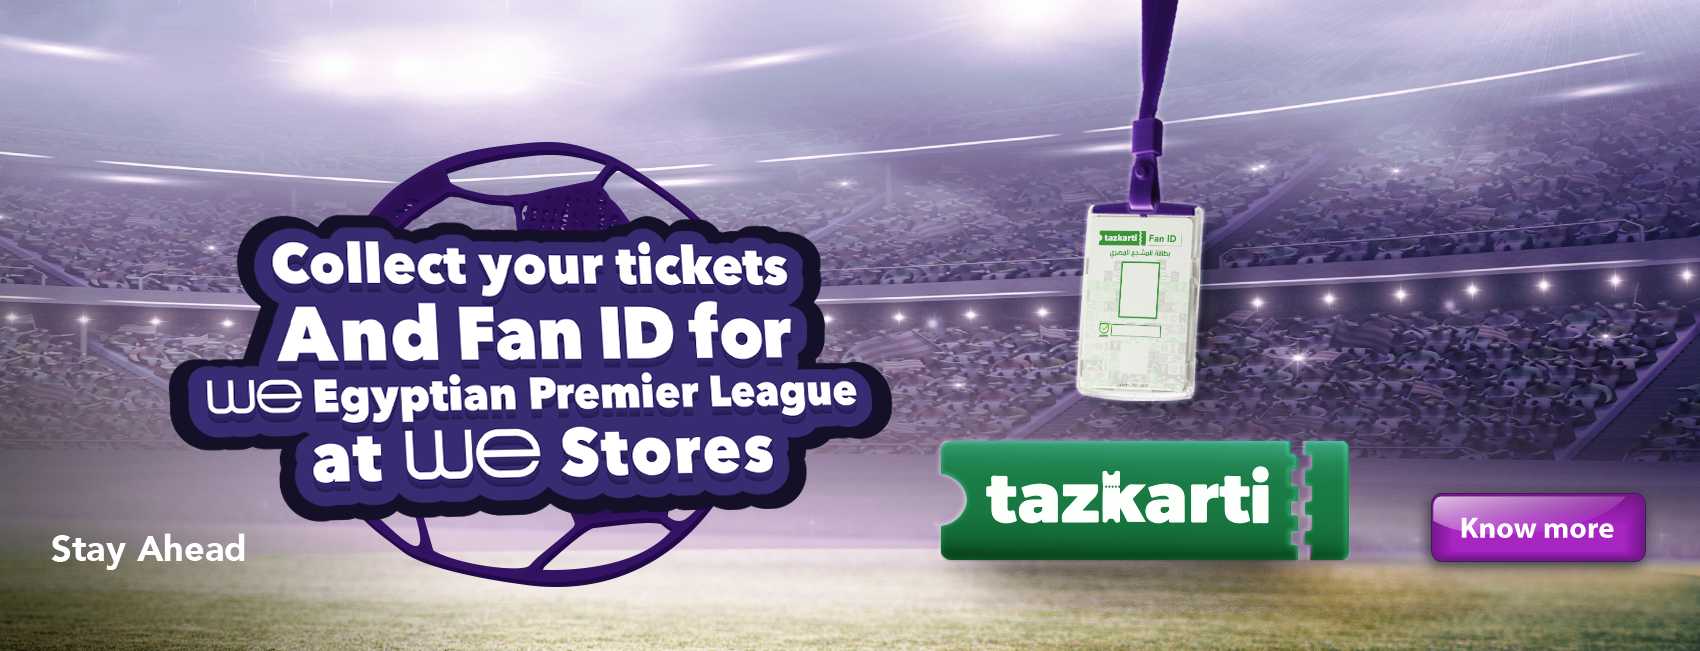 Collect WE Egyptian Premier League Tickets and Fan ID at WE stores